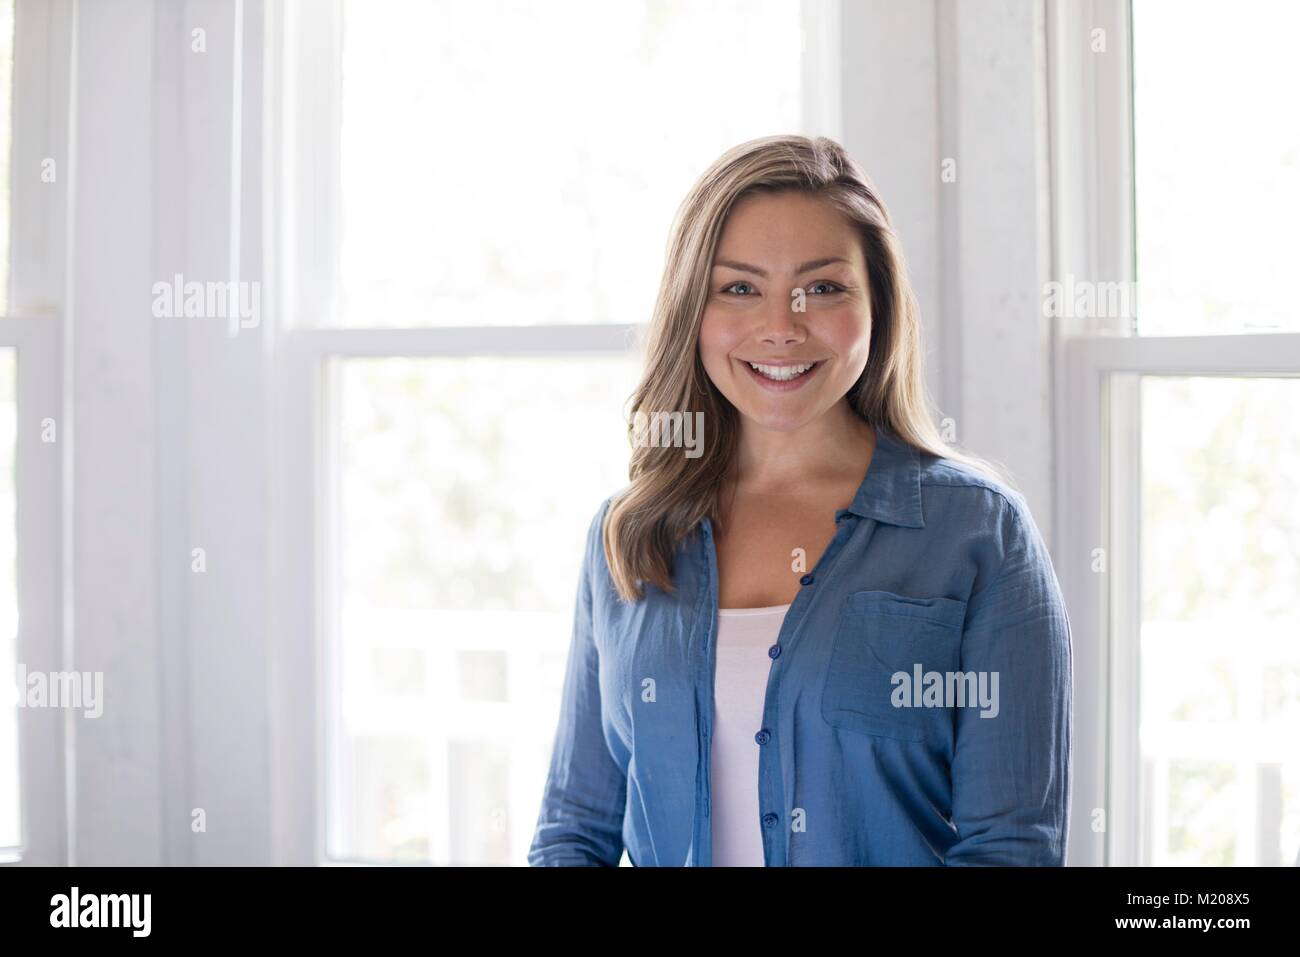 Portrait of young woman smiling towards camera. Stock Photo